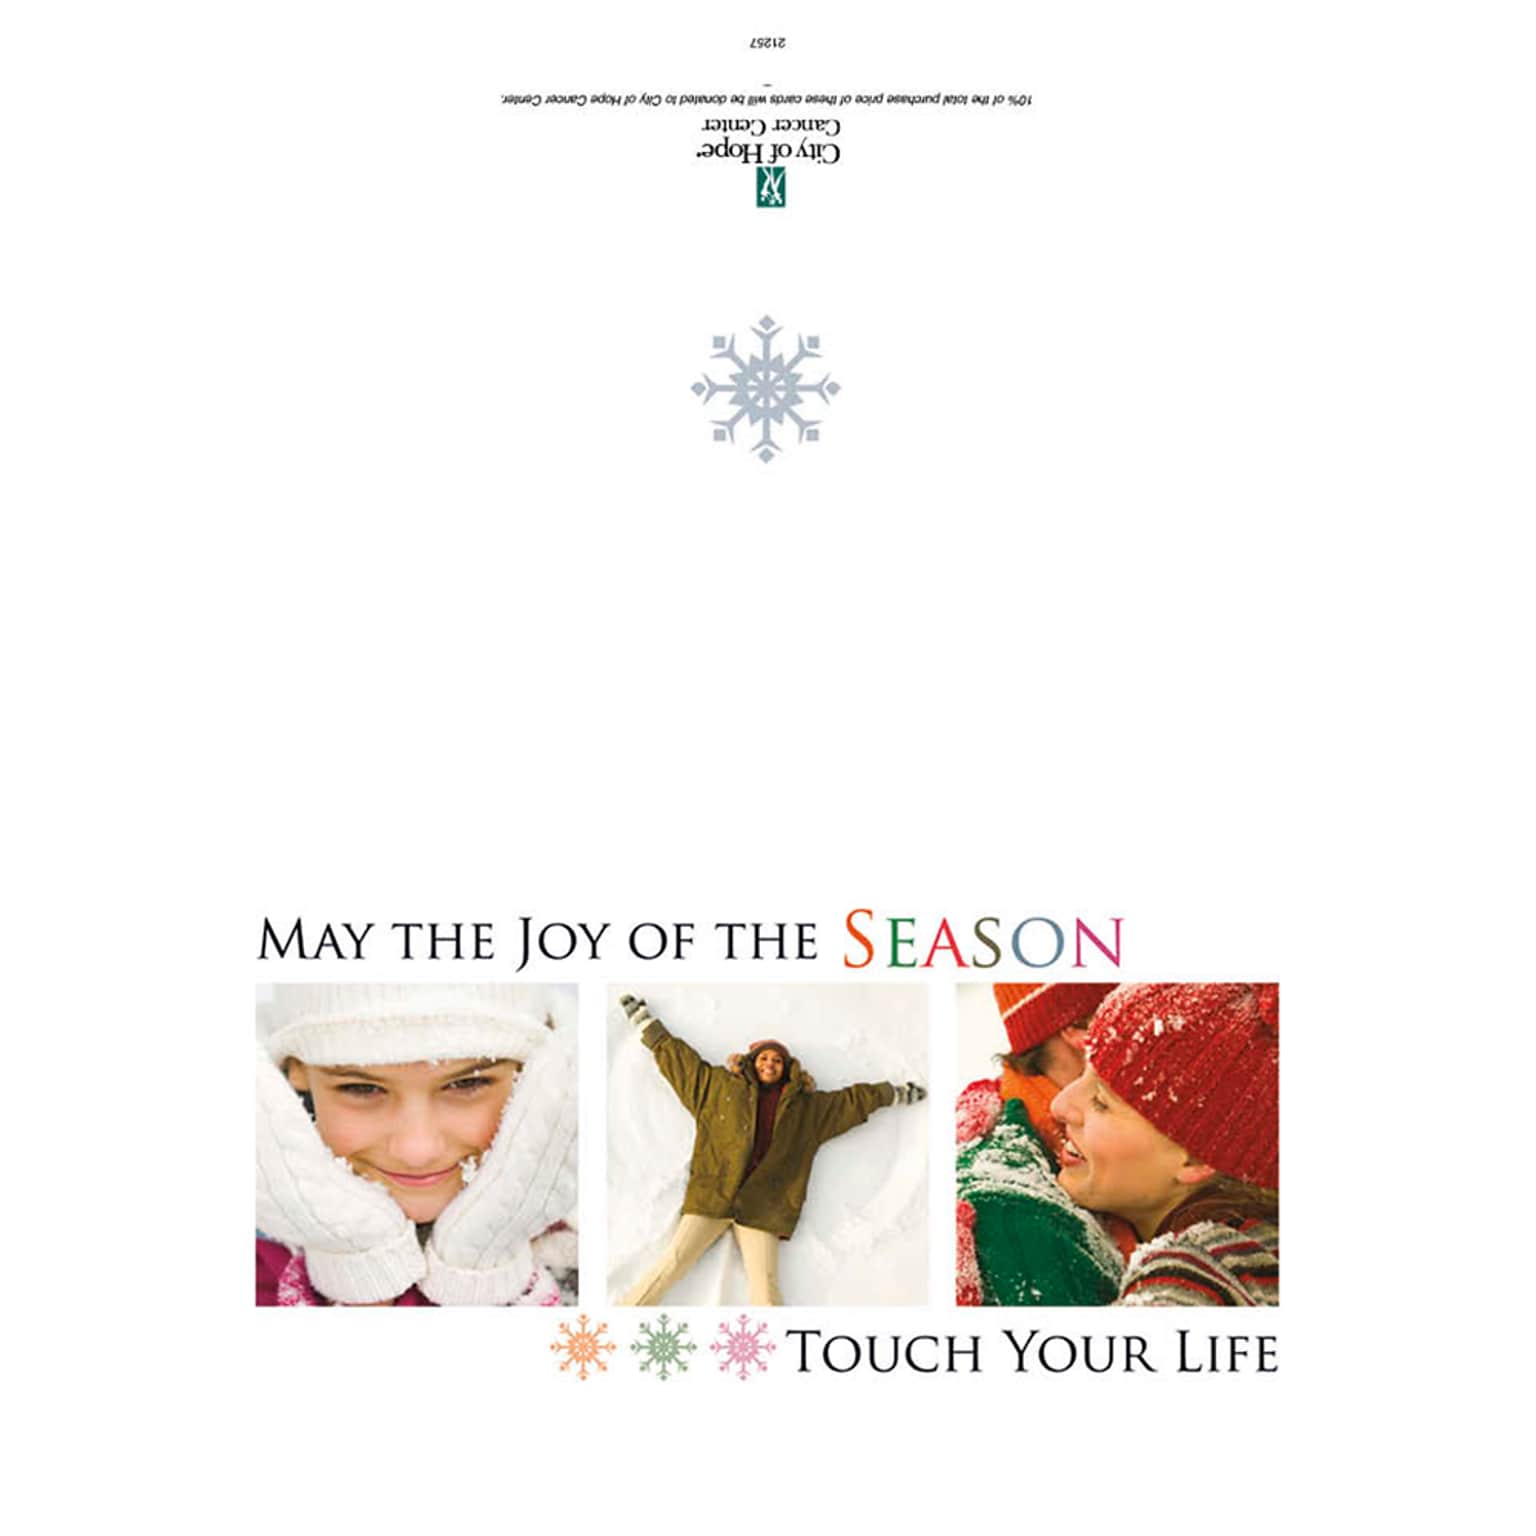 May the joy of the season touch your life - 7 x 10 scored for folding to 7 x 5, 25 cards w/A7 envelopes per set